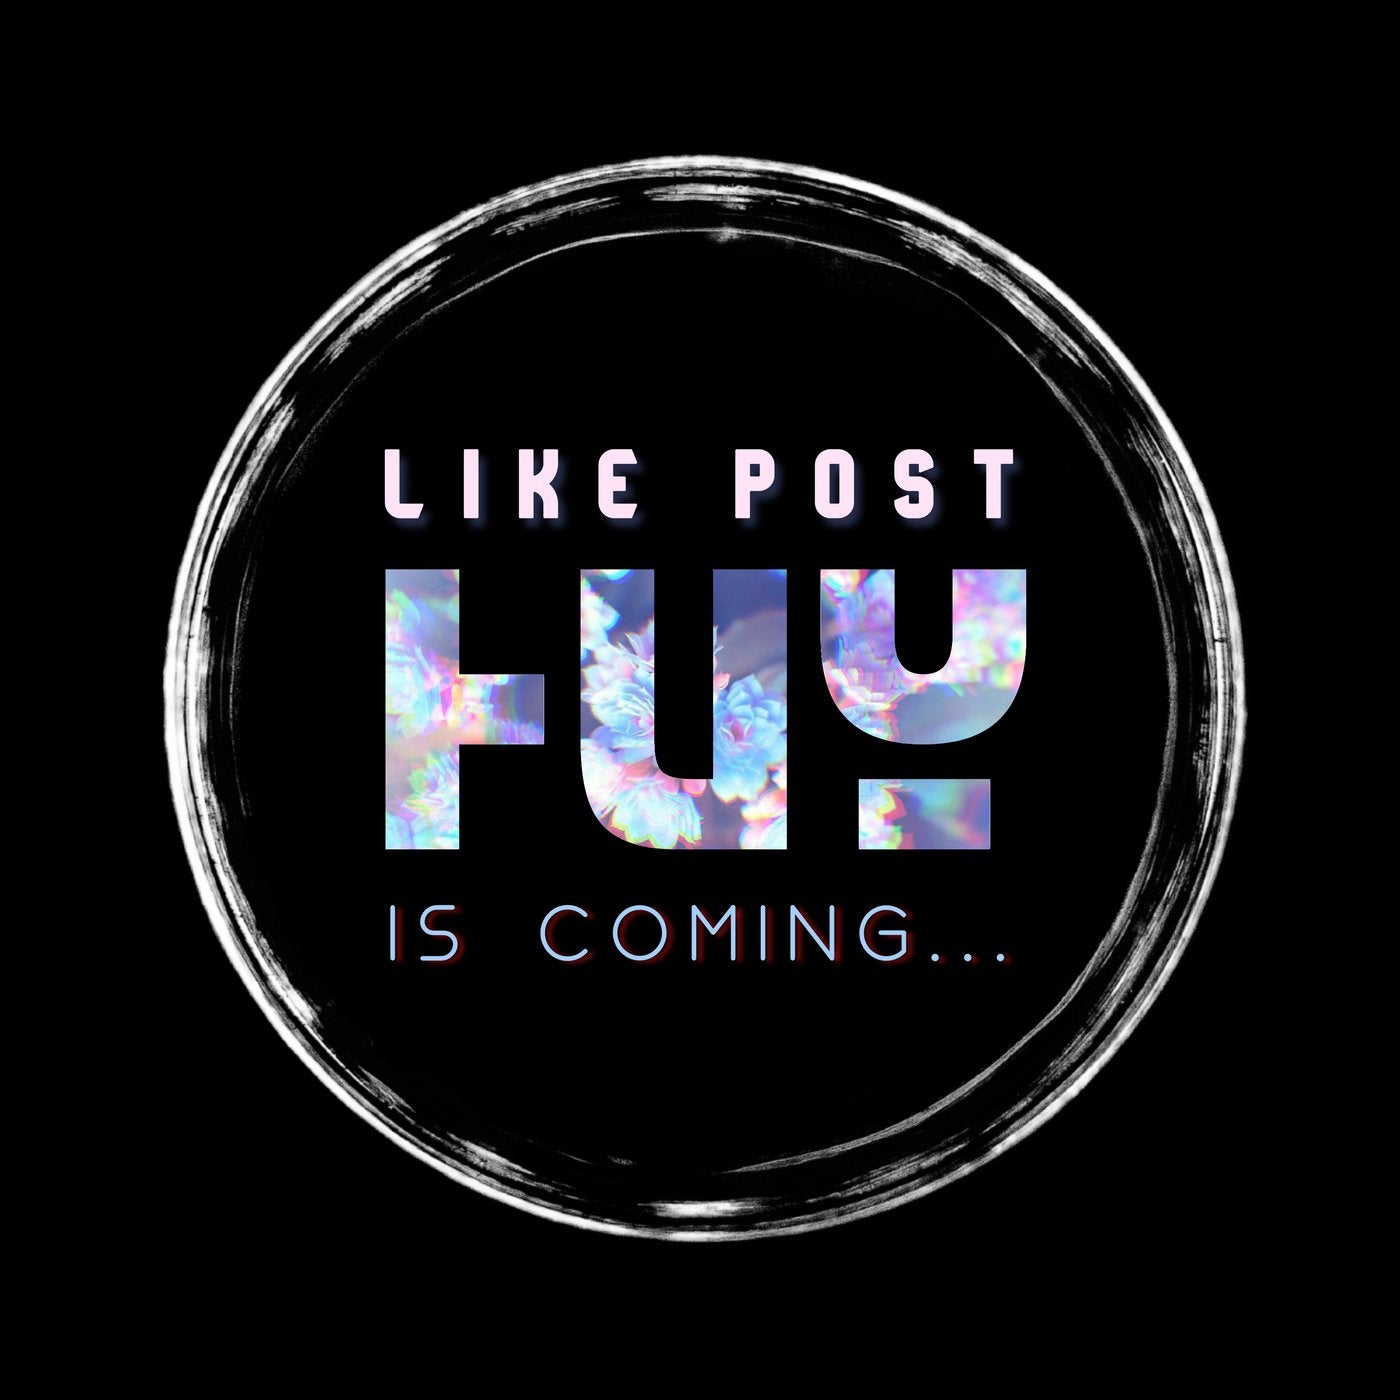 Huy is coming...